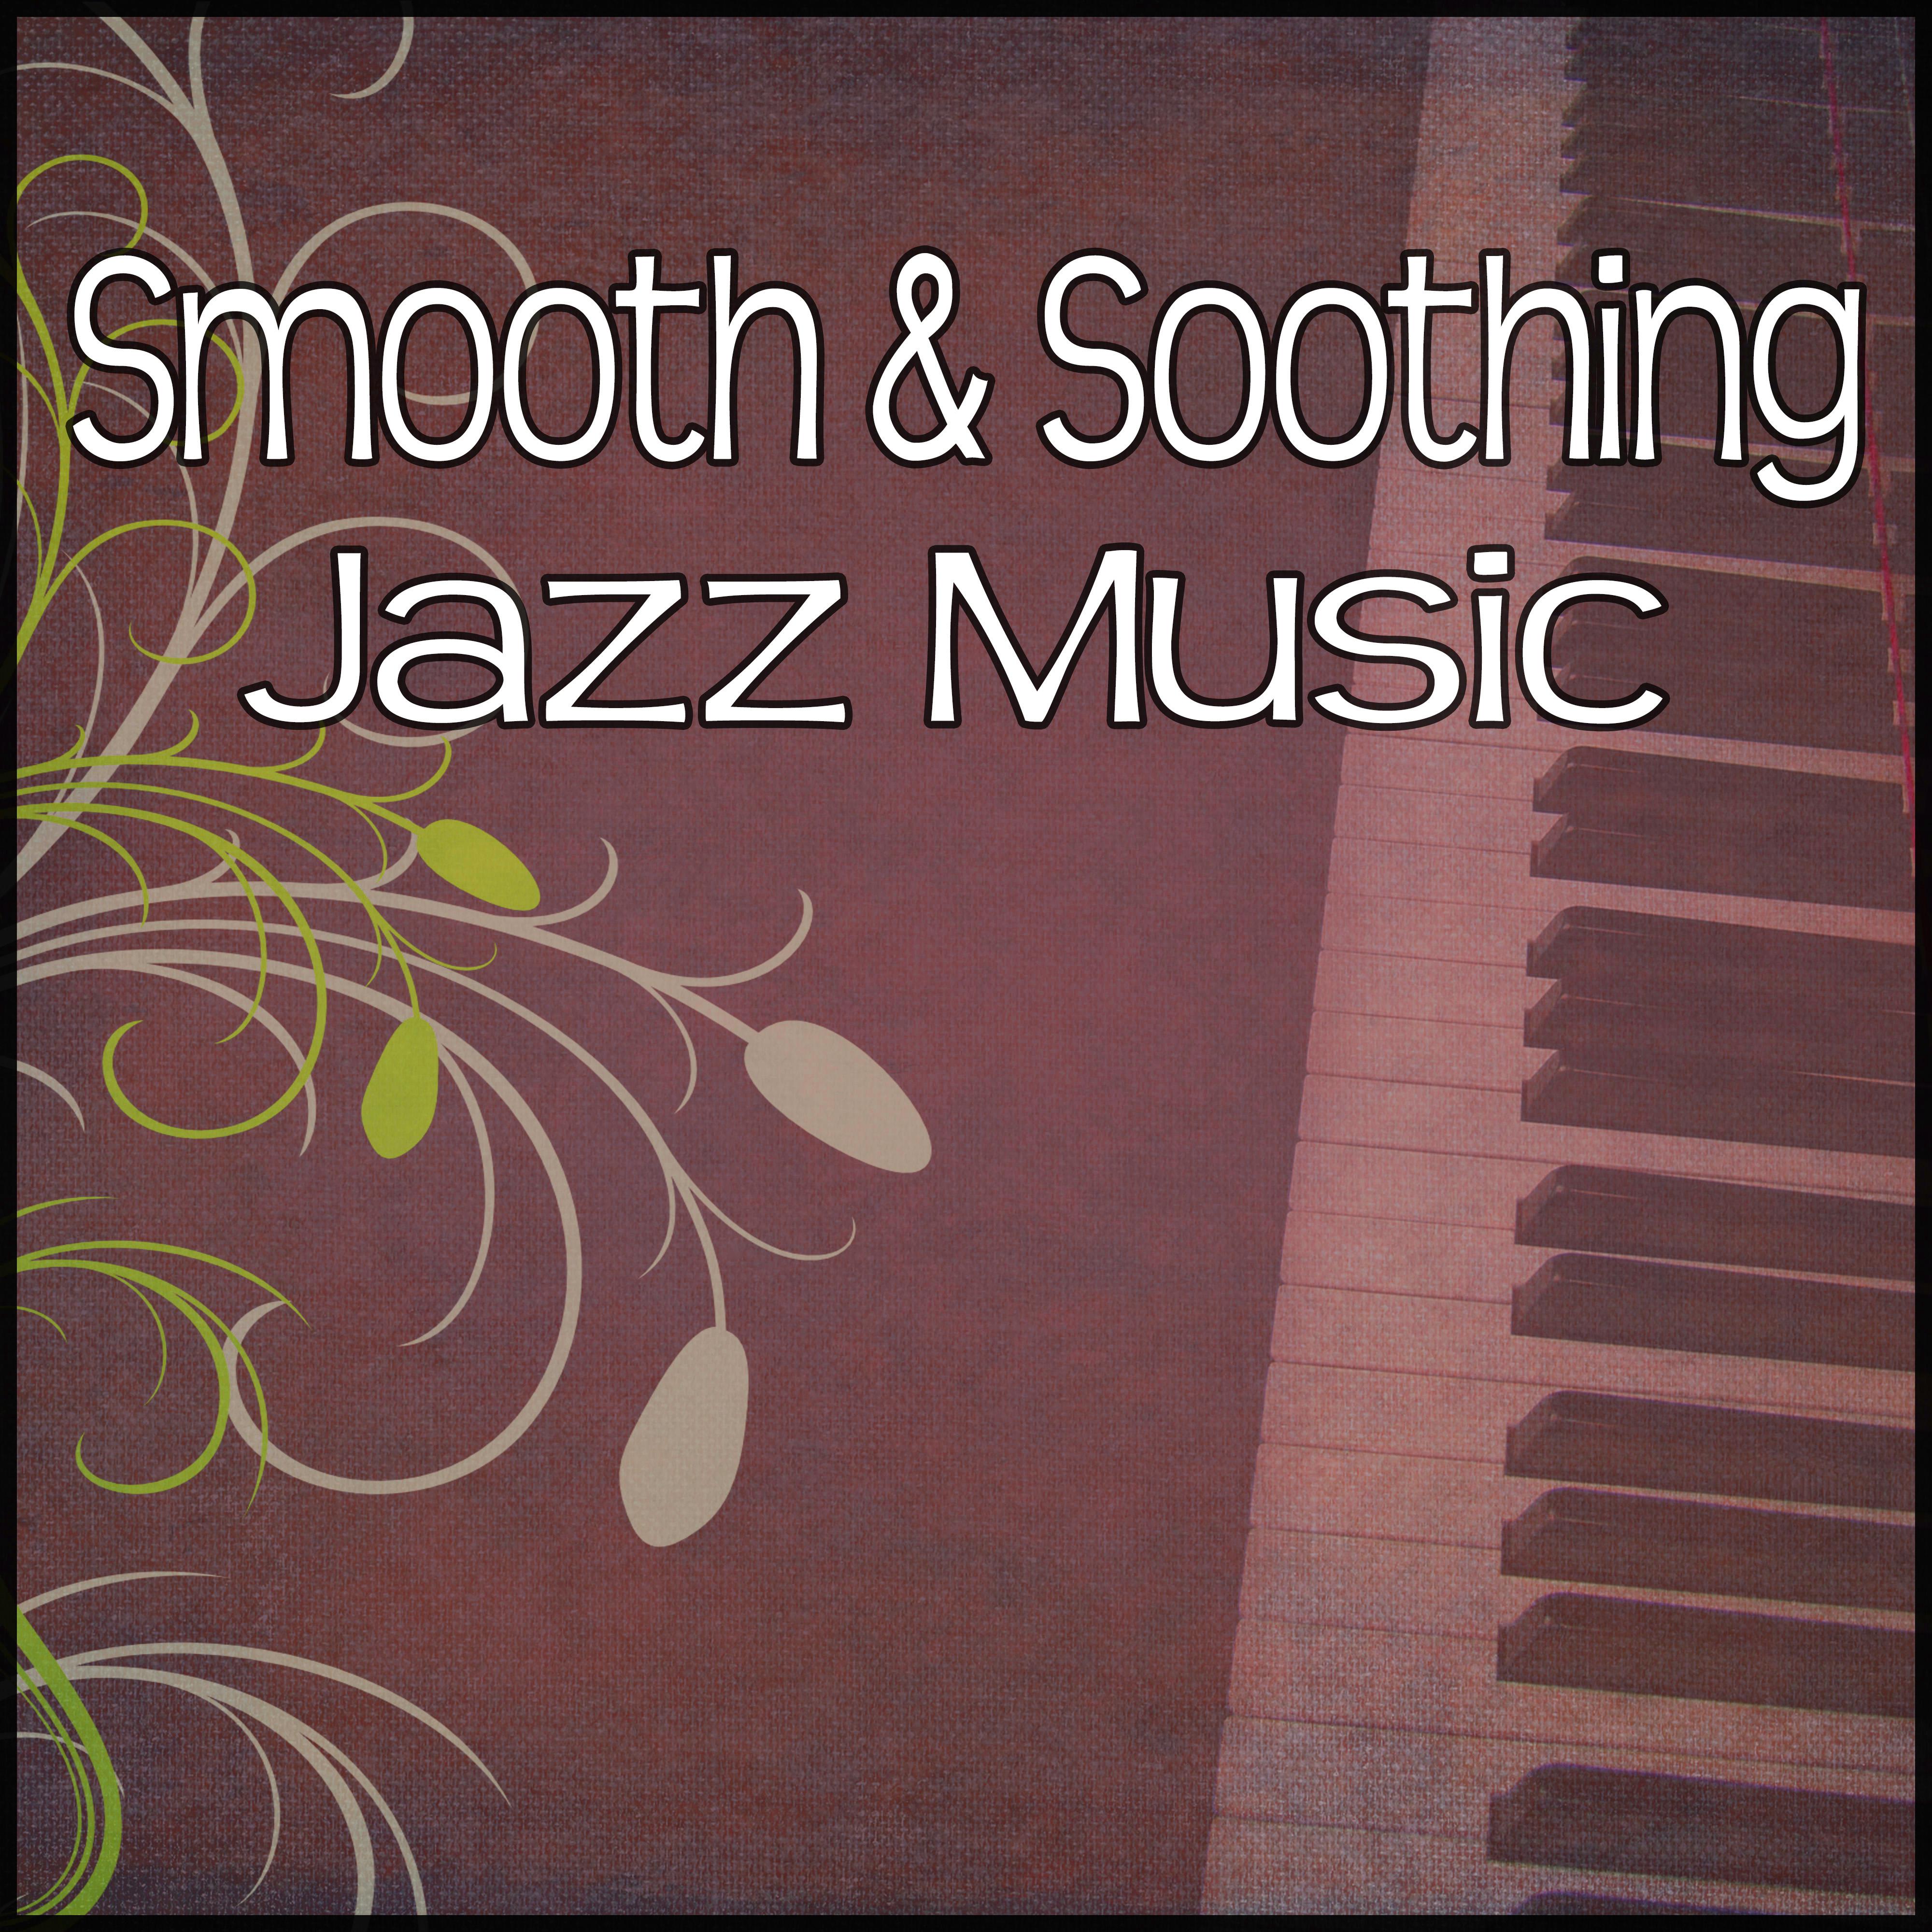 Smooth & Soothing Jazz Music – Soft Ambient Piano Jazz, Calming Piano Sounds, Lounge Jazz, Smooth Background Jazz, Jazz Music